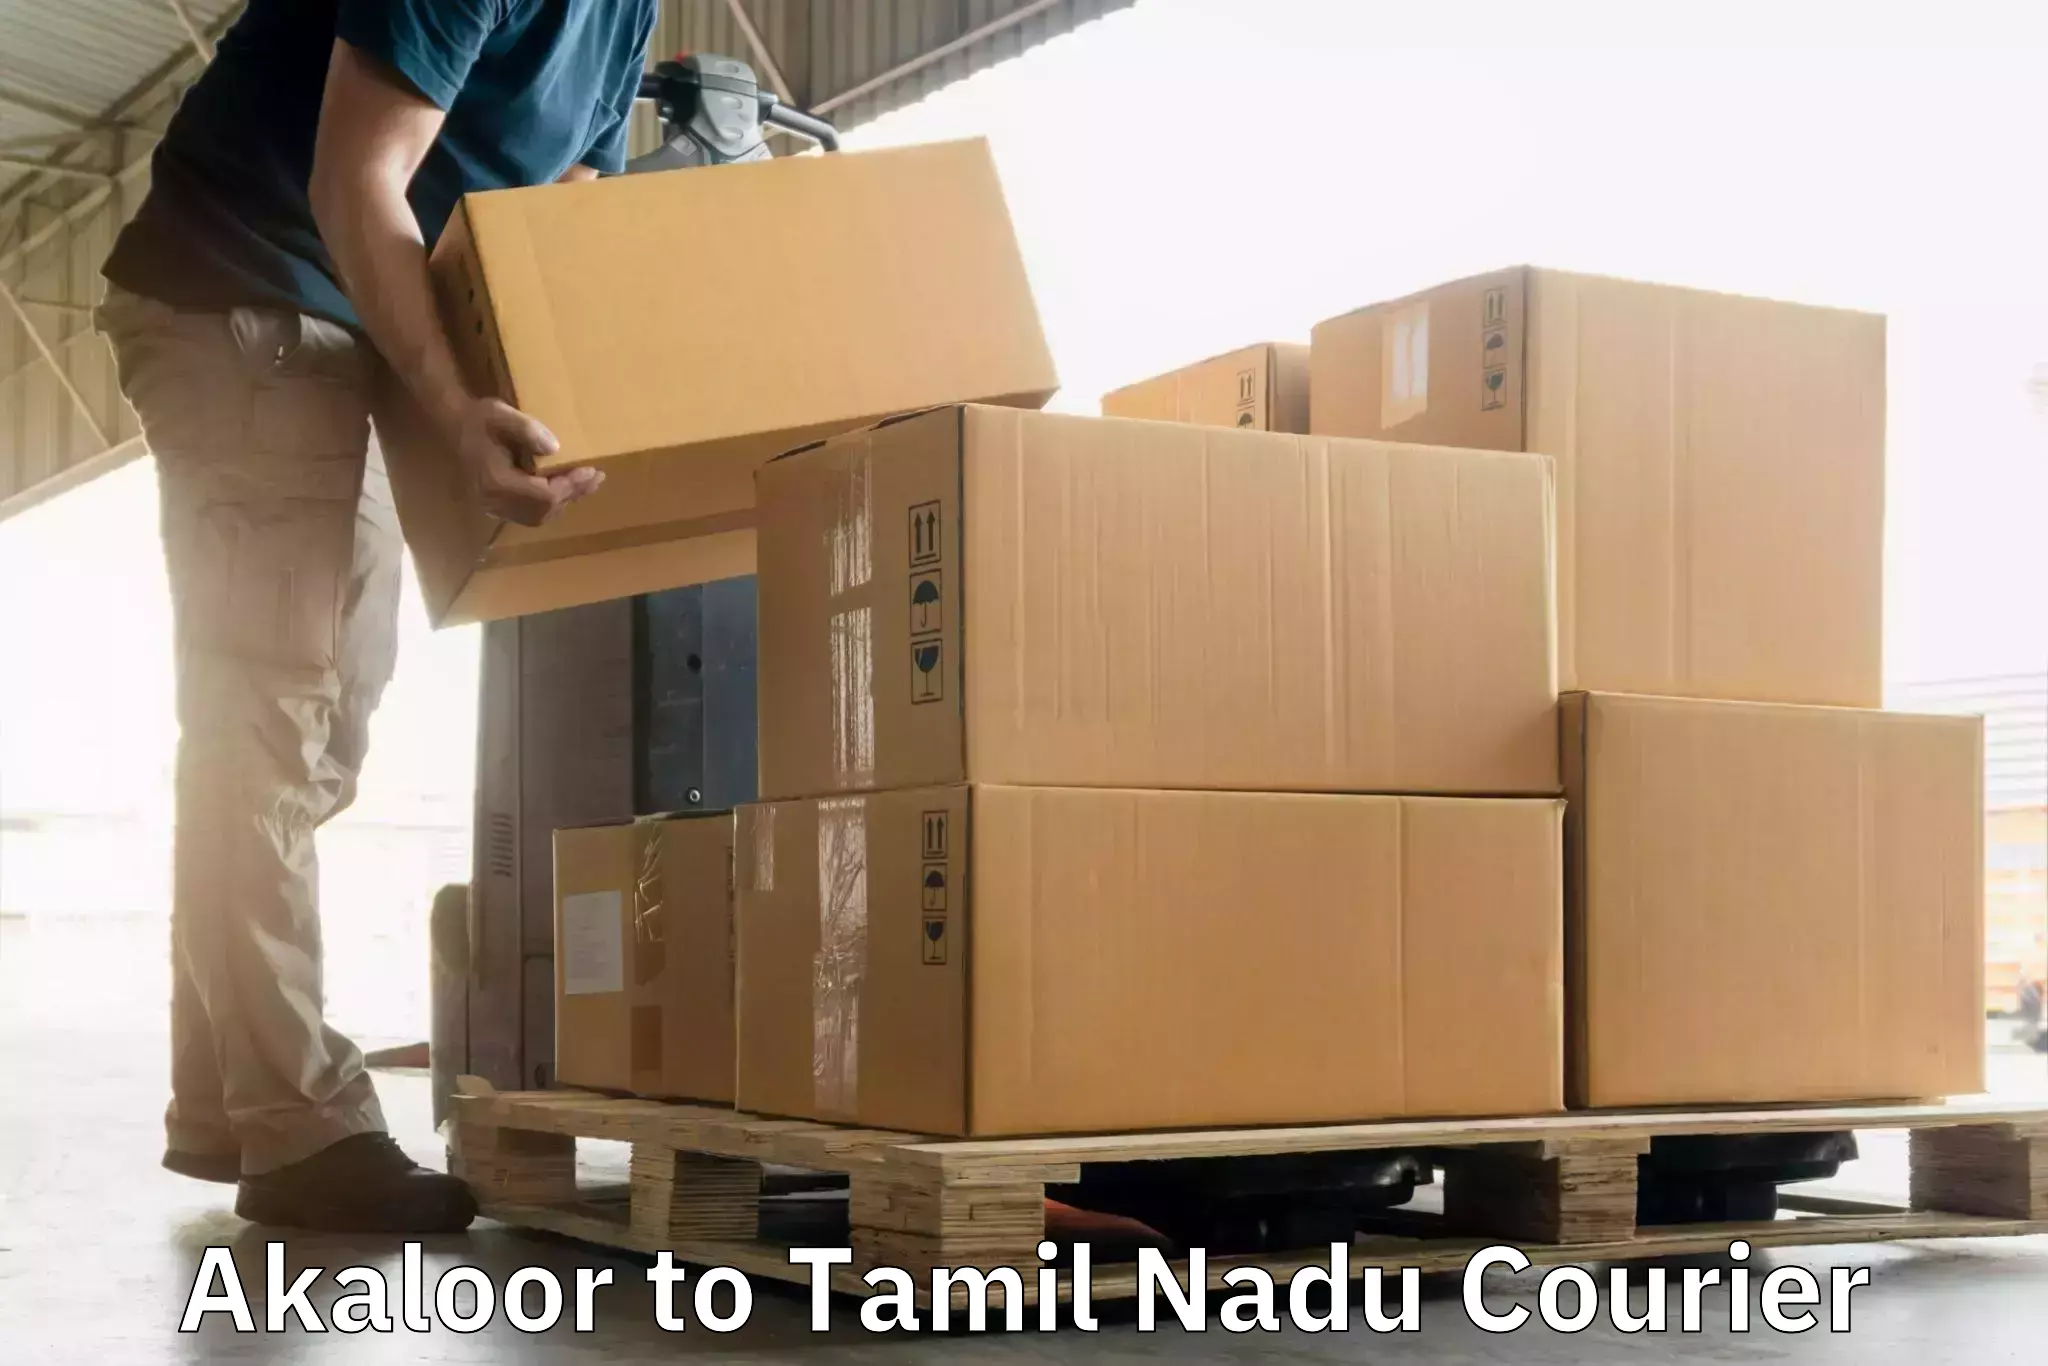 State-of-the-art courier technology Akaloor to Attur